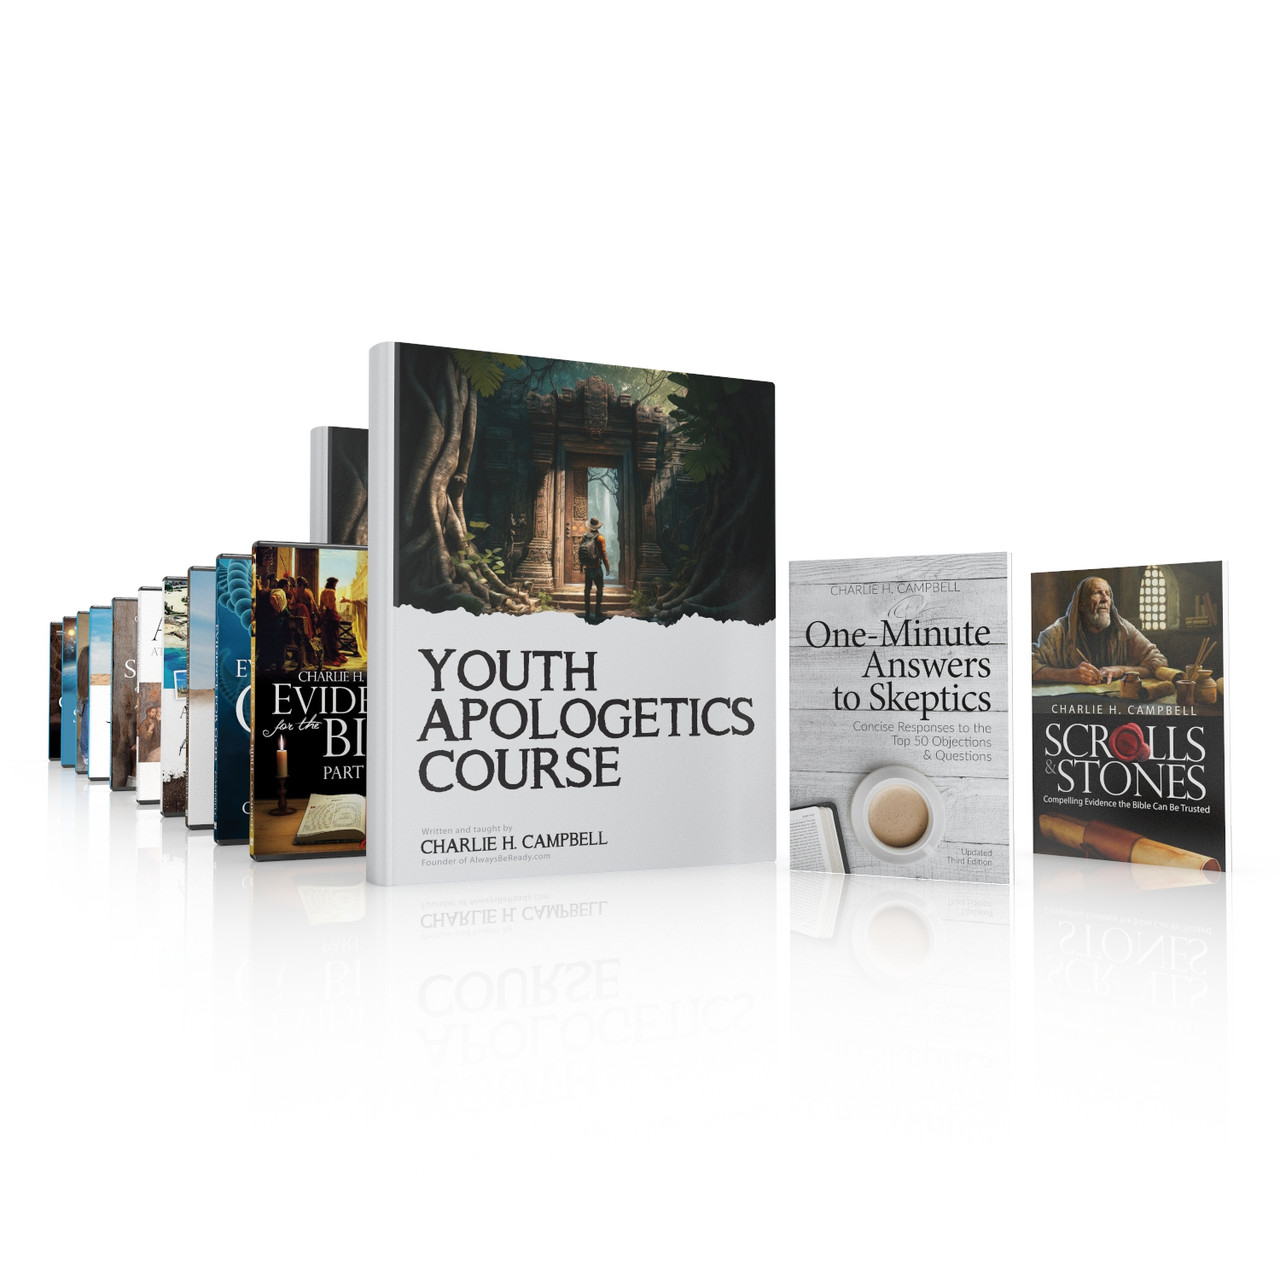 and　USB　videos,　10　Youth　Apologetics　Teacher's　Apologetics　with　Always　Student　Books　Course　(Complete　Drive　Store　Set—2　Flash　Be　Workbook,　Edition)　Ready